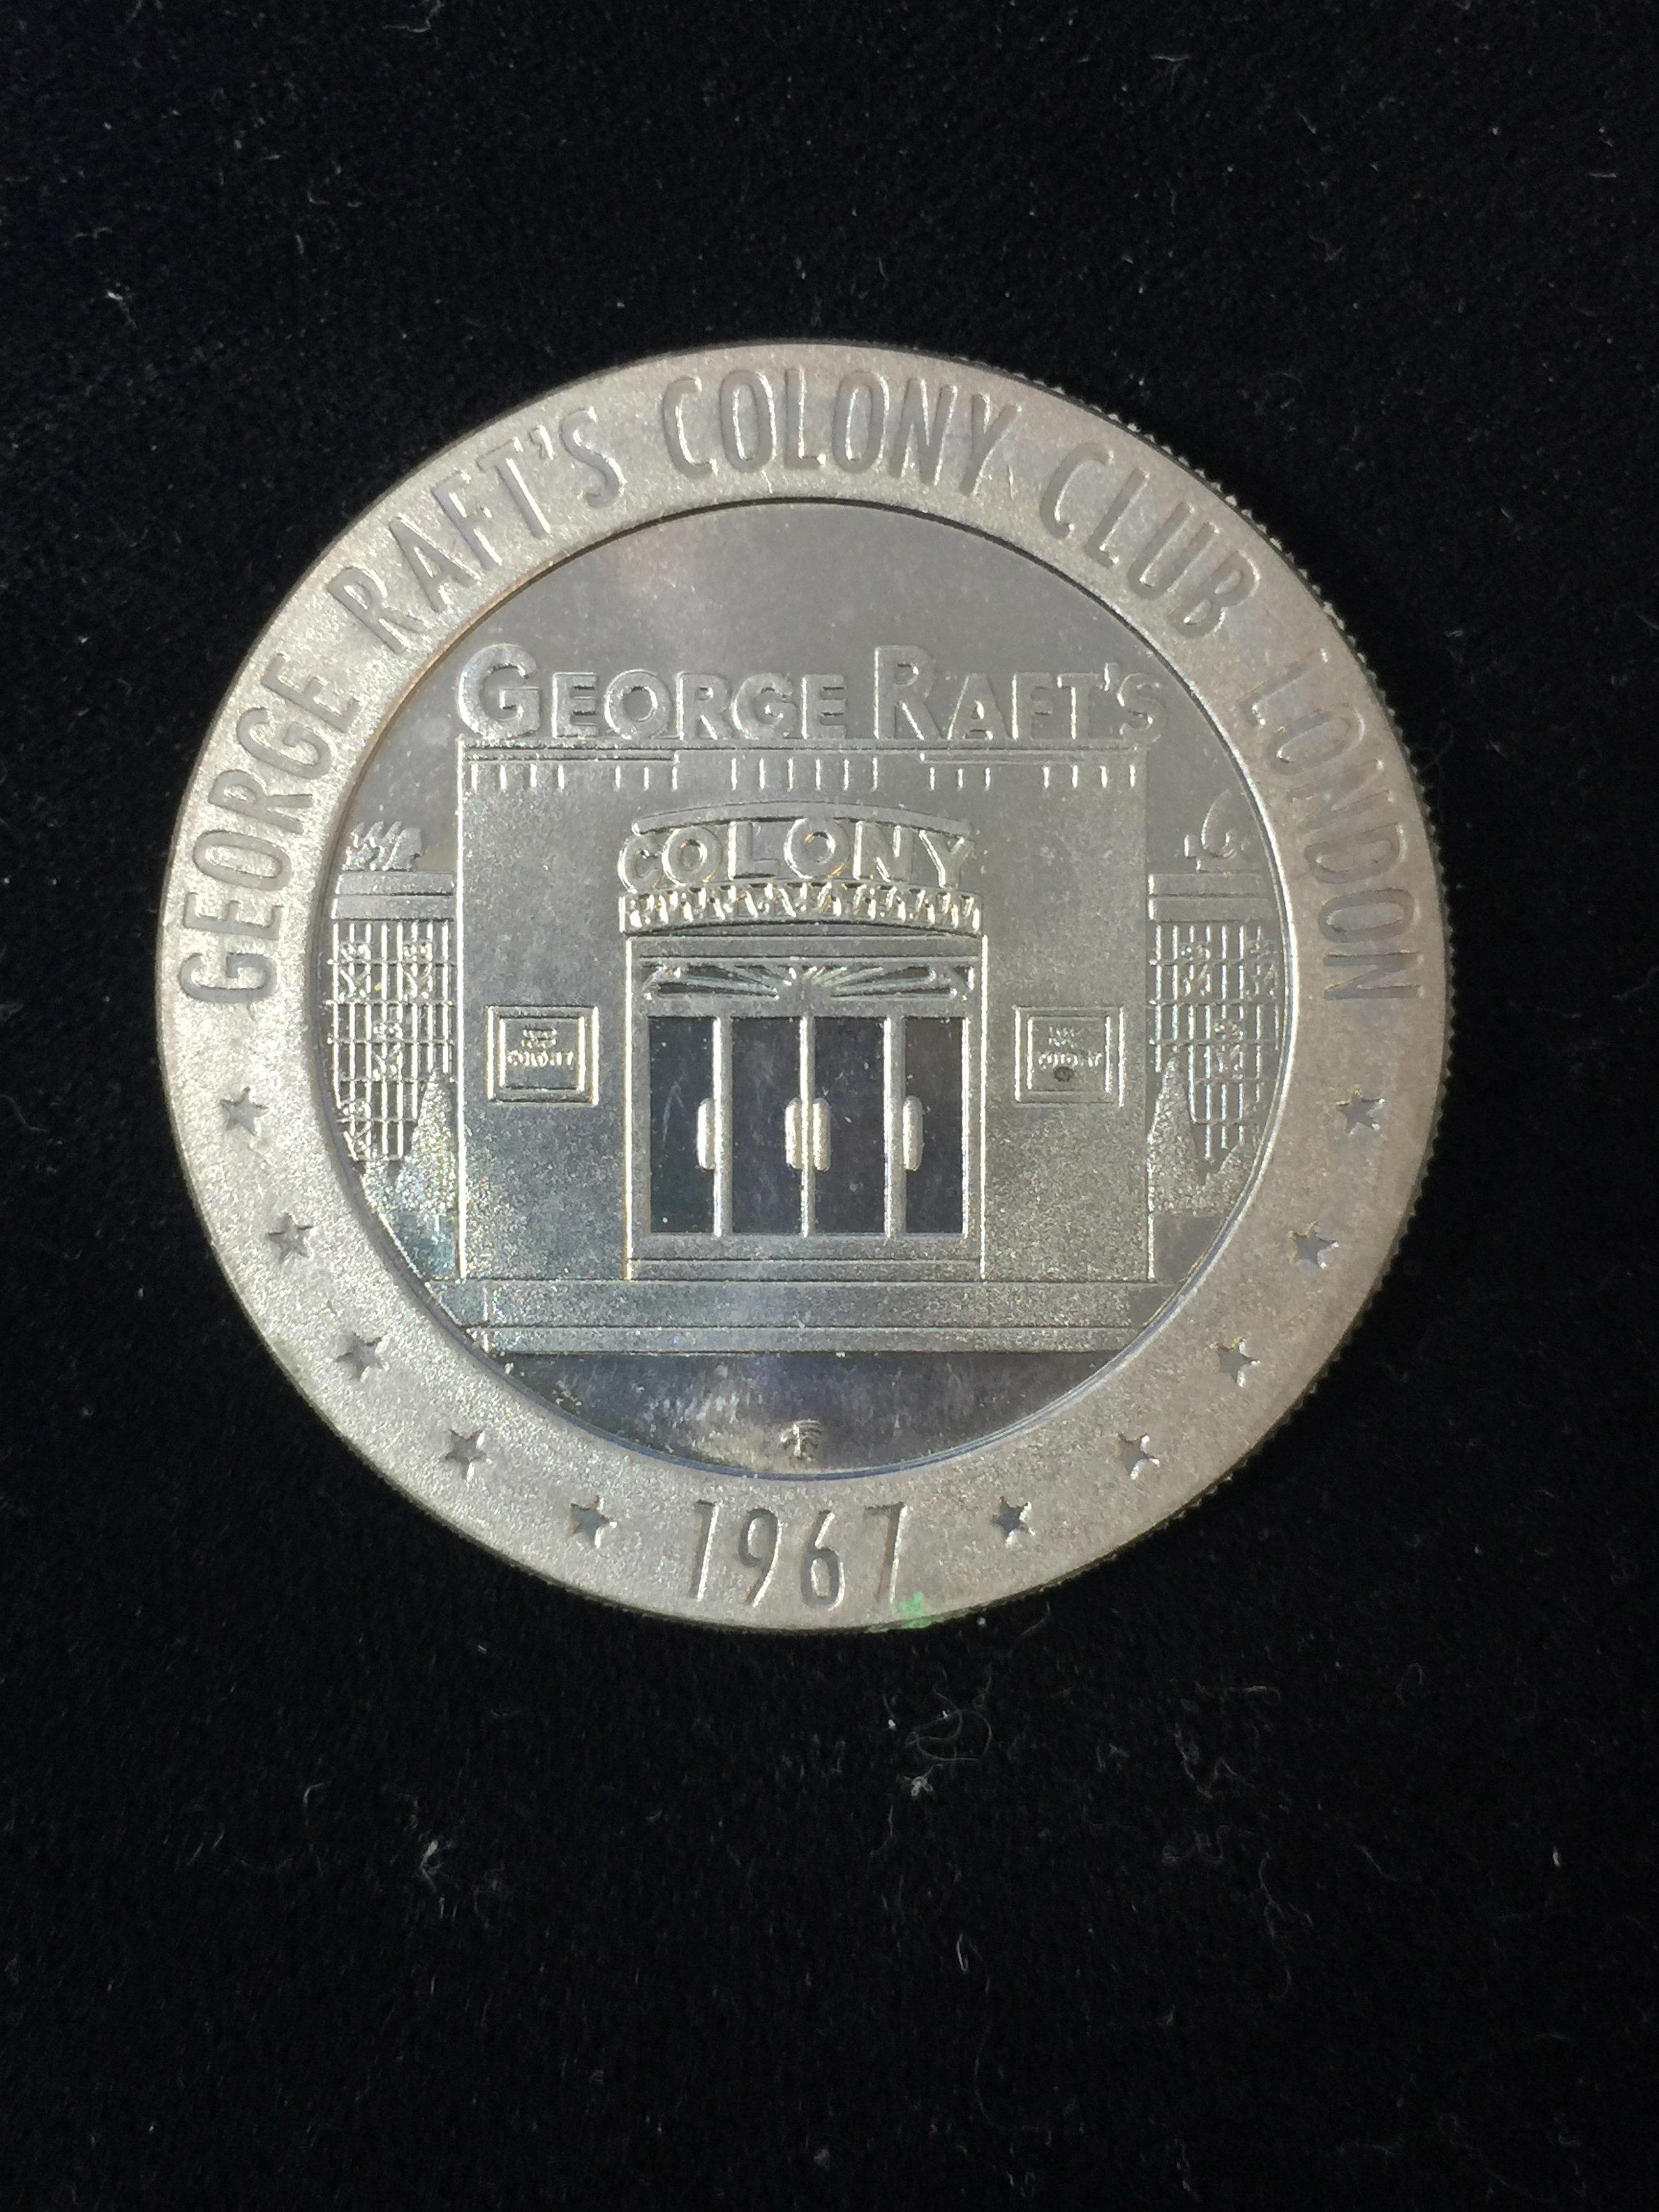 George Raft's Colony Club London Gaming Chip Coin